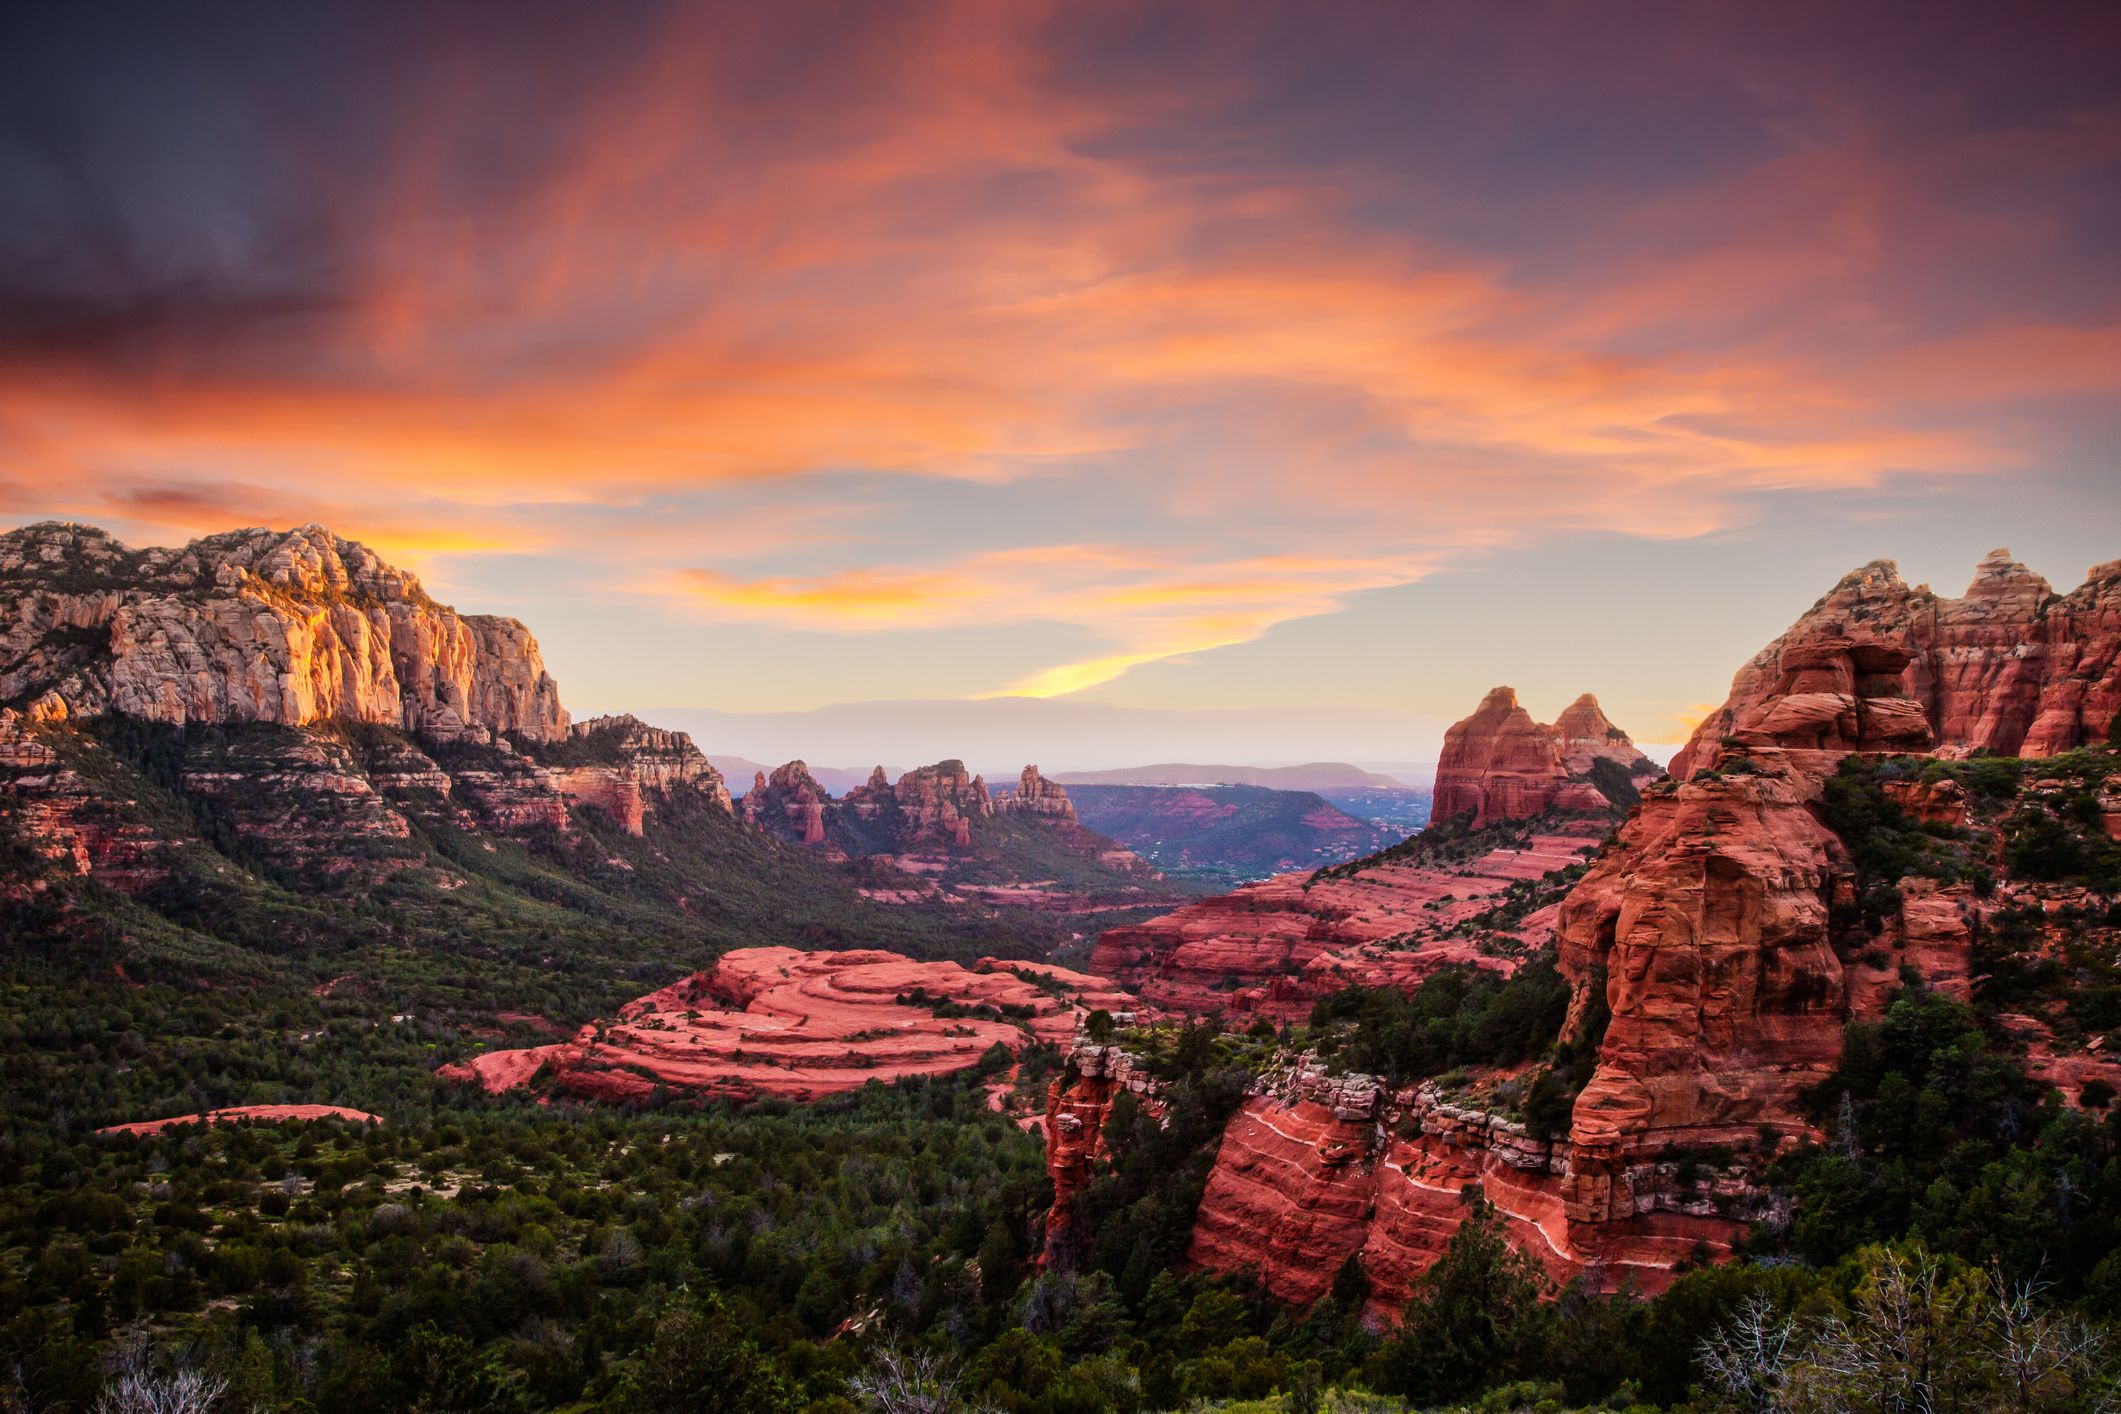 <p>Sedona was once home to the Sinagua Indians and is believed to be the point where healing energy converges. For decades it has attracted spiritualists who believe they can feel that convergence of energy.</p><p>However, even if you don’t feel the convergence, there are dozens of holistic therapies and classes to help you on your spiritual quest. Some of the best hiking in the world is also found at Sedona, giving you an incredible opportunity to connect with nature in an awe-inspiring location.</p>